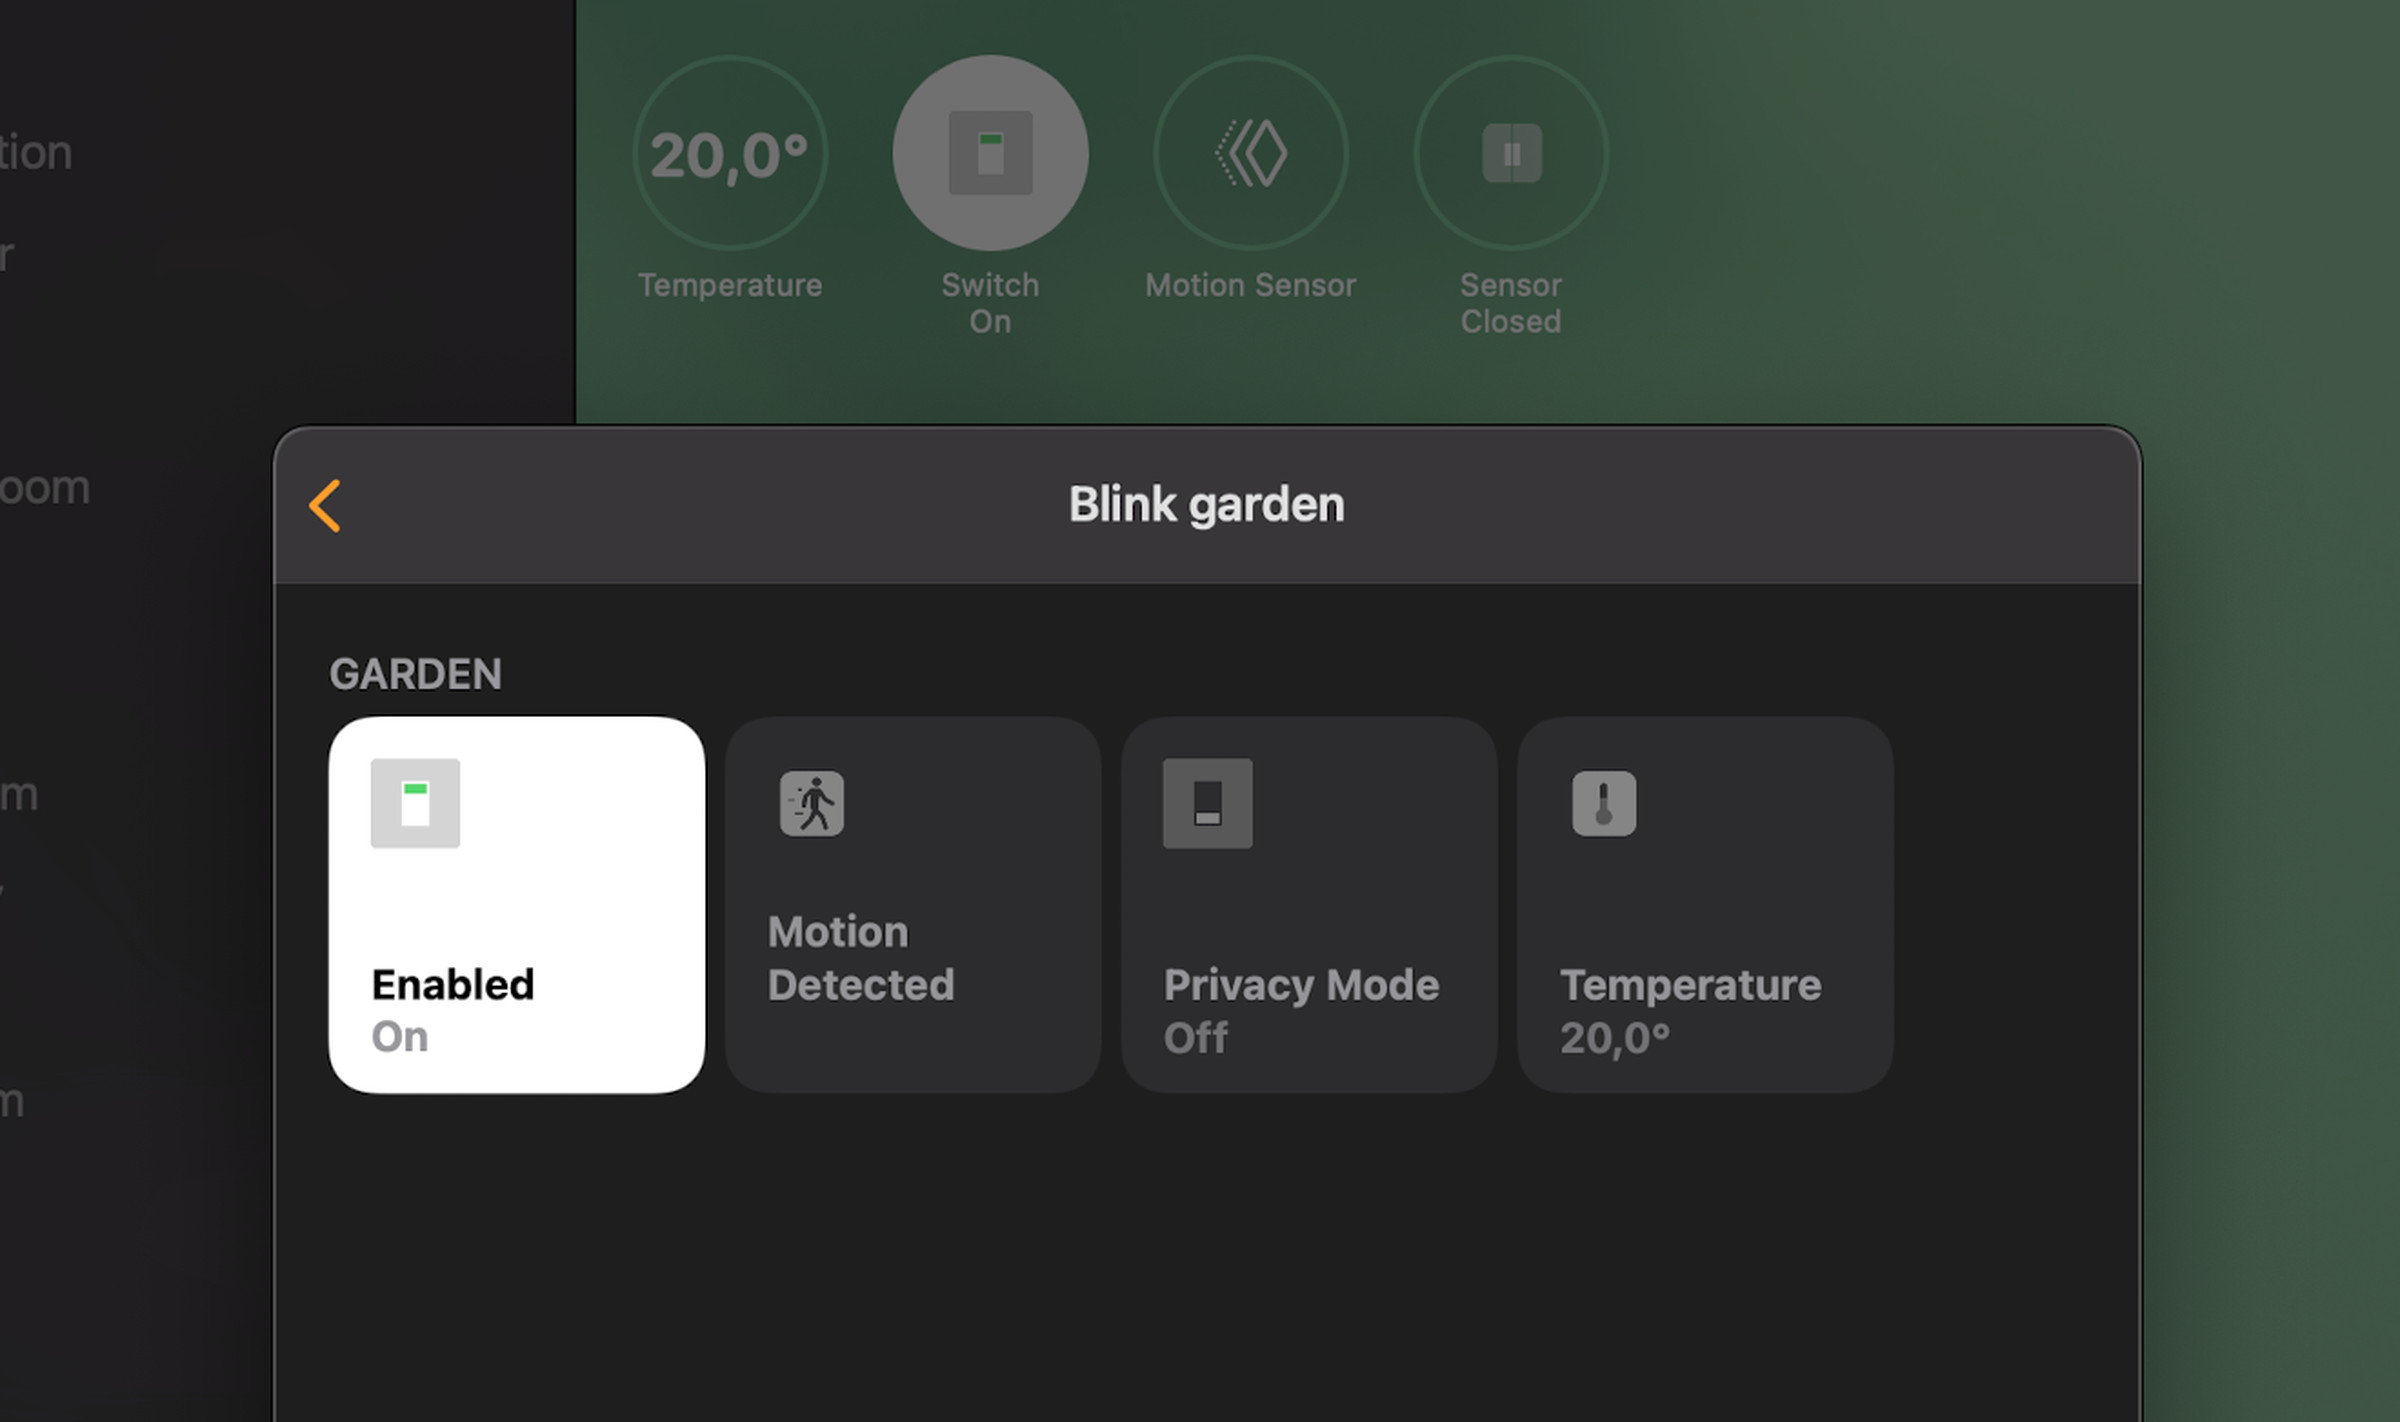 Homebridge turns this Blink XT outdoor camera into a temperature and motion trigger for other automations in Apple’s Home app.